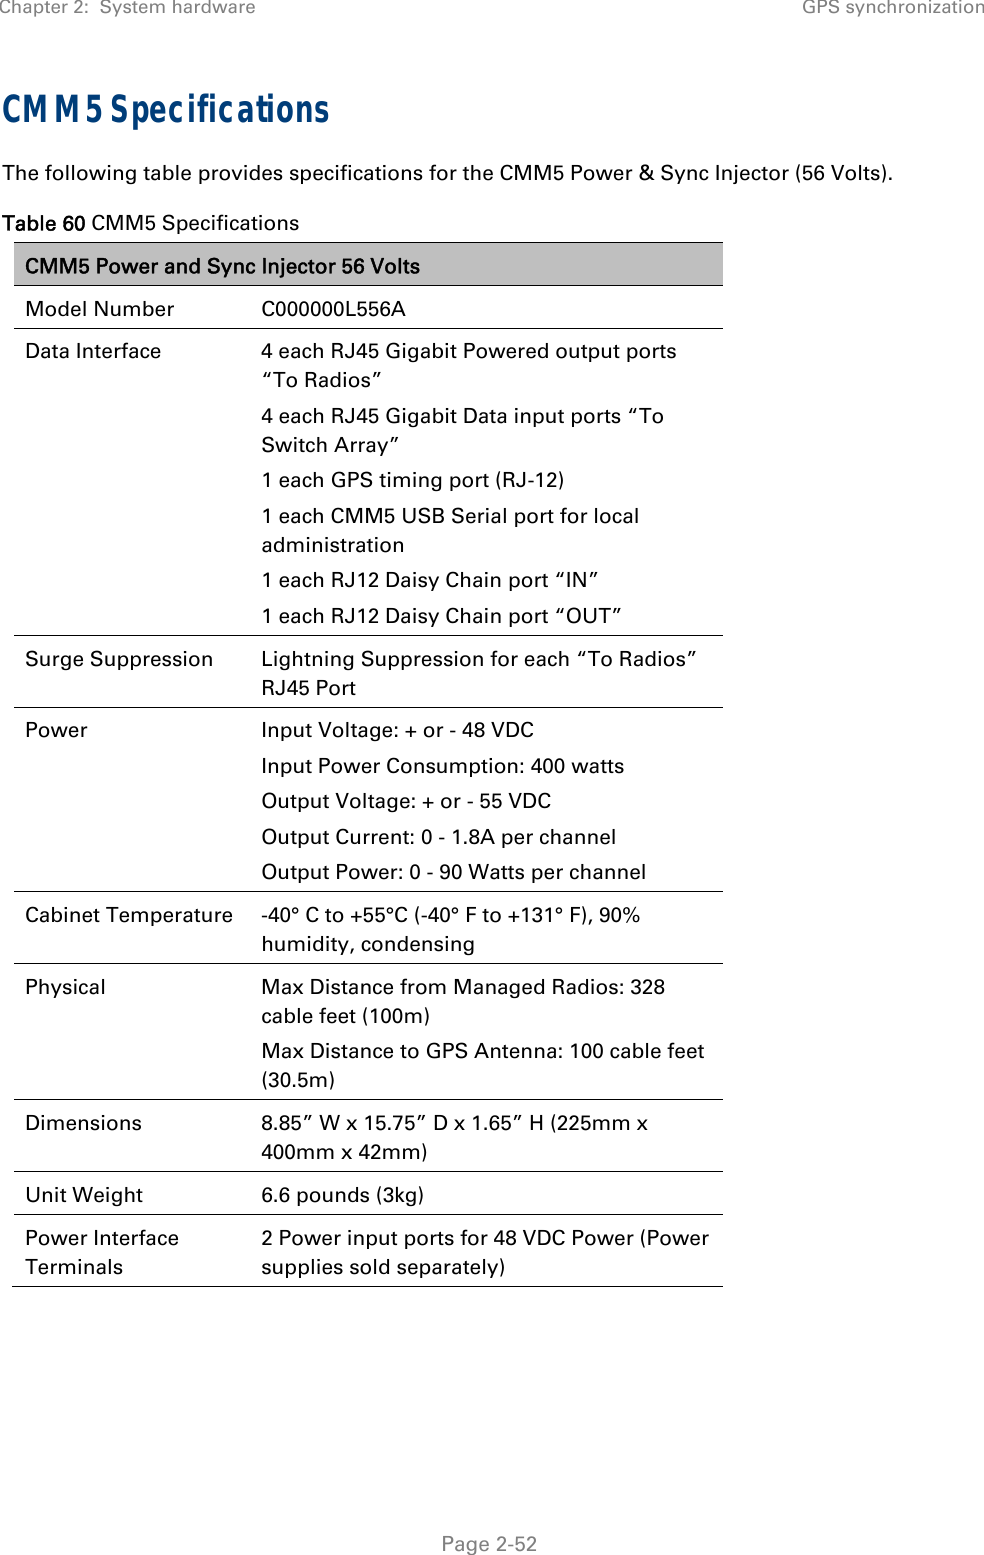 Chapter 2:  System hardware GPS synchronization   Page 2-52 CMM5 Specifications The following table provides specifications for the CMM5 Power &amp; Sync Injector (56 Volts). Table 60 CMM5 Specifications CMM5 Power and Sync Injector 56 Volts Model Number  C000000L556A Data Interface  4 each RJ45 Gigabit Powered output ports “To Radios” 4 each RJ45 Gigabit Data input ports “To Switch Array” 1 each GPS timing port (RJ-12) 1 each CMM5 USB Serial port for local administration 1 each RJ12 Daisy Chain port “IN” 1 each RJ12 Daisy Chain port “OUT” Surge Suppression  Lightning Suppression for each “To Radios” RJ45 Port Power  Input Voltage: + or - 48 VDC Input Power Consumption: 400 watts Output Voltage: + or - 55 VDC Output Current: 0 - 1.8A per channel Output Power: 0 - 90 Watts per channel Cabinet Temperature  -40° C to +55°C (-40° F to +131° F), 90% humidity, condensing Physical  Max Distance from Managed Radios: 328 cable feet (100m) Max Distance to GPS Antenna: 100 cable feet (30.5m) Dimensions  8.85” W x 15.75” D x 1.65” H (225mm x 400mm x 42mm) Unit Weight  6.6 pounds (3kg) Power Interface Terminals 2 Power input ports for 48 VDC Power (Power supplies sold separately)    